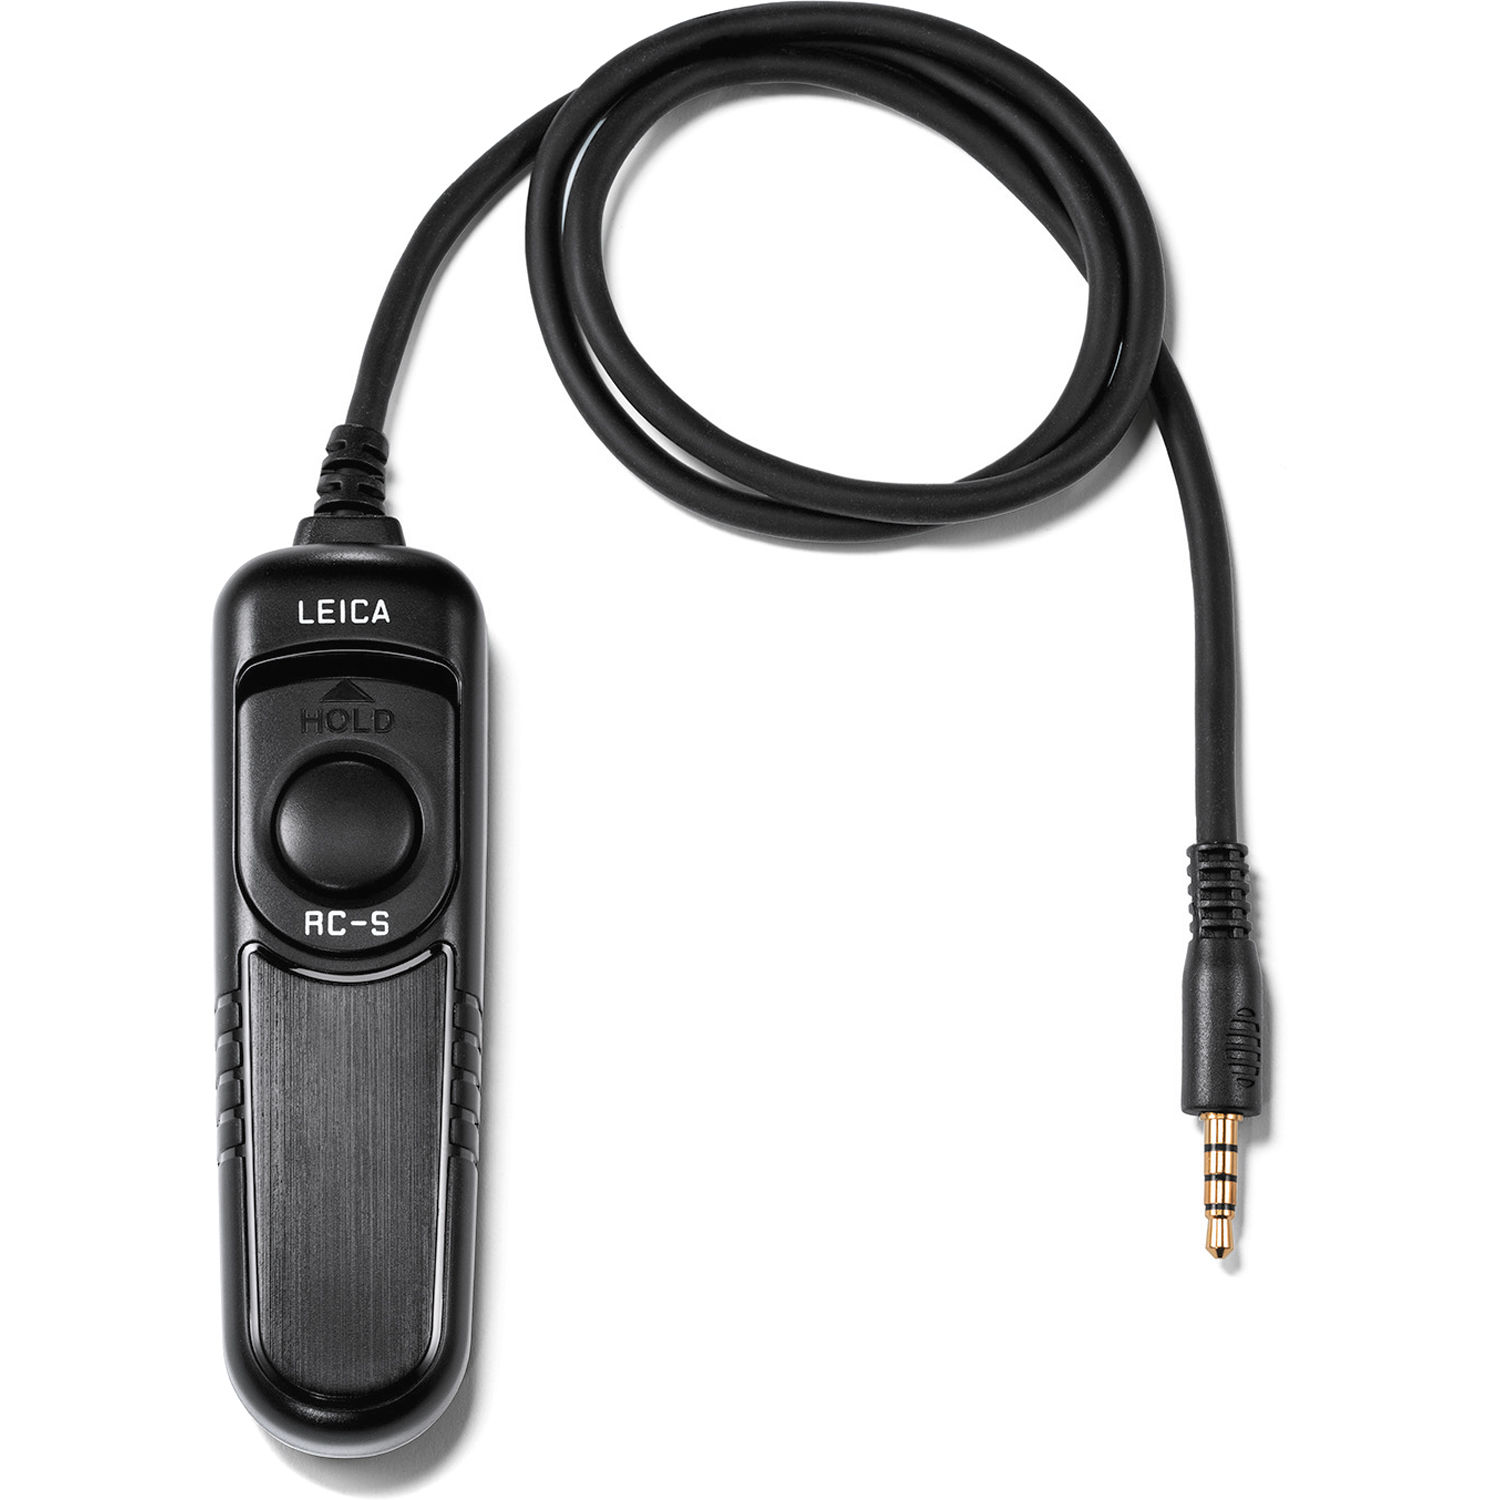 TThumbnail image for Leica RC-SCL6 Remote Cable for SL2